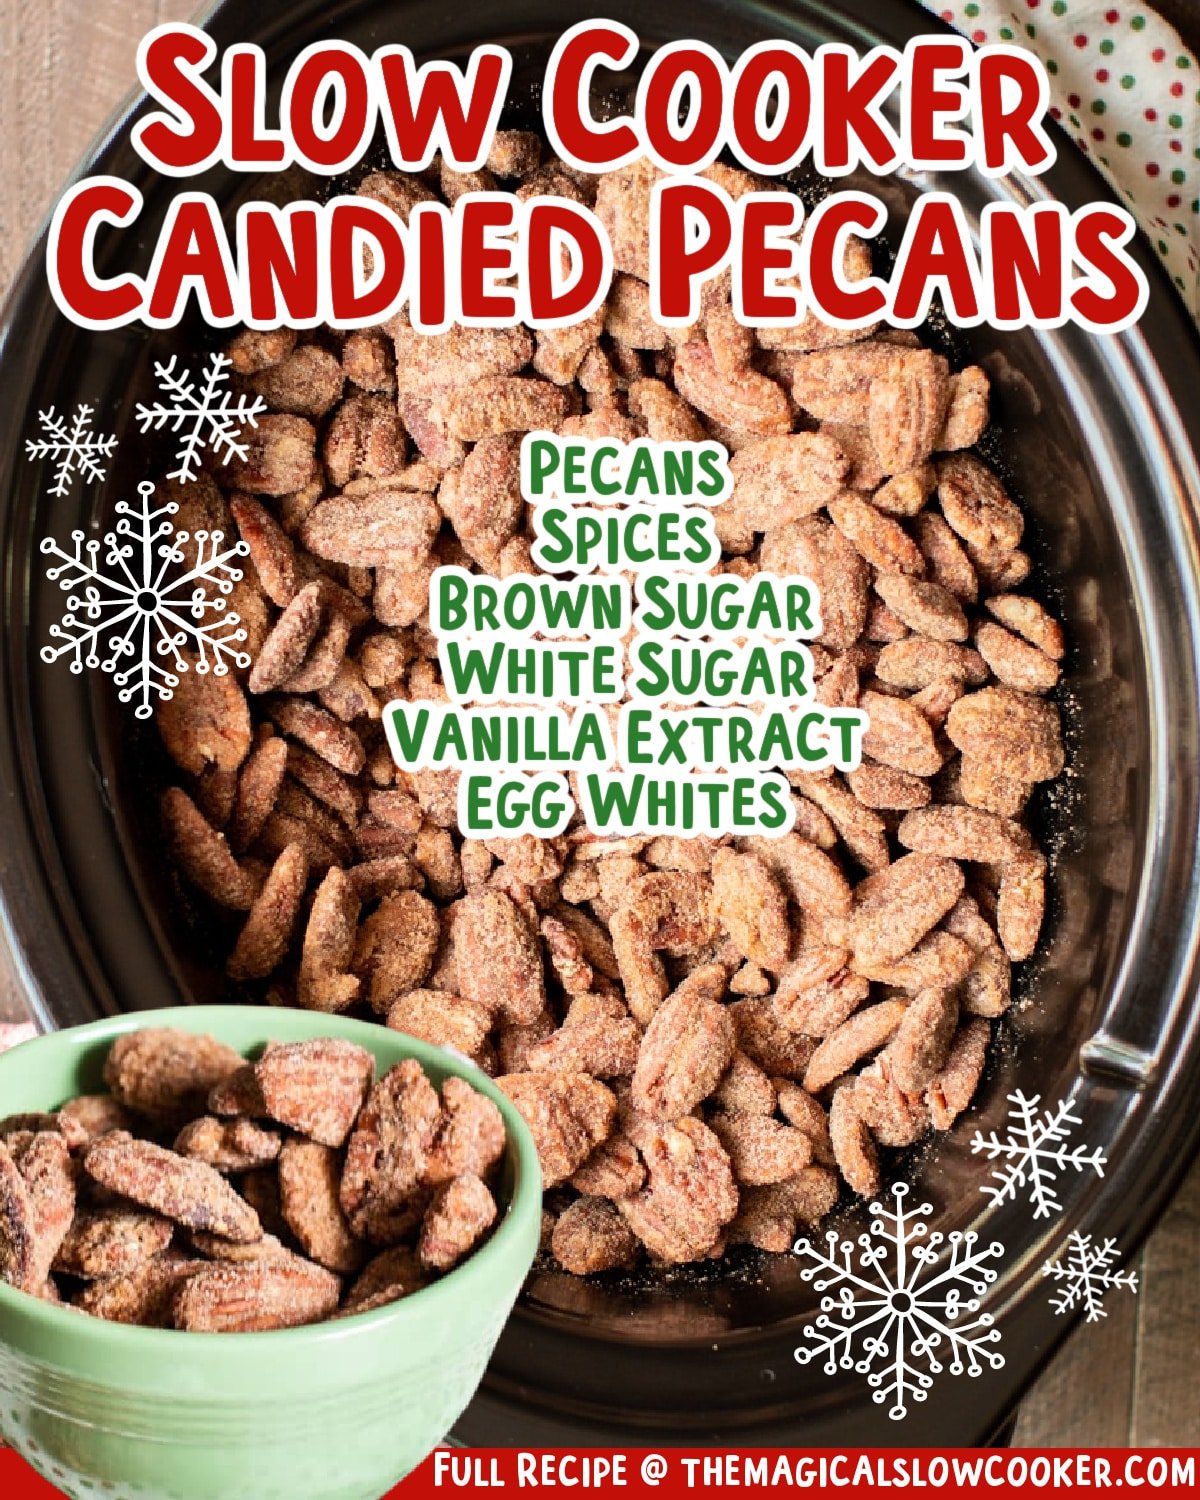 collage of candied pecans images for facebook and pinterest.